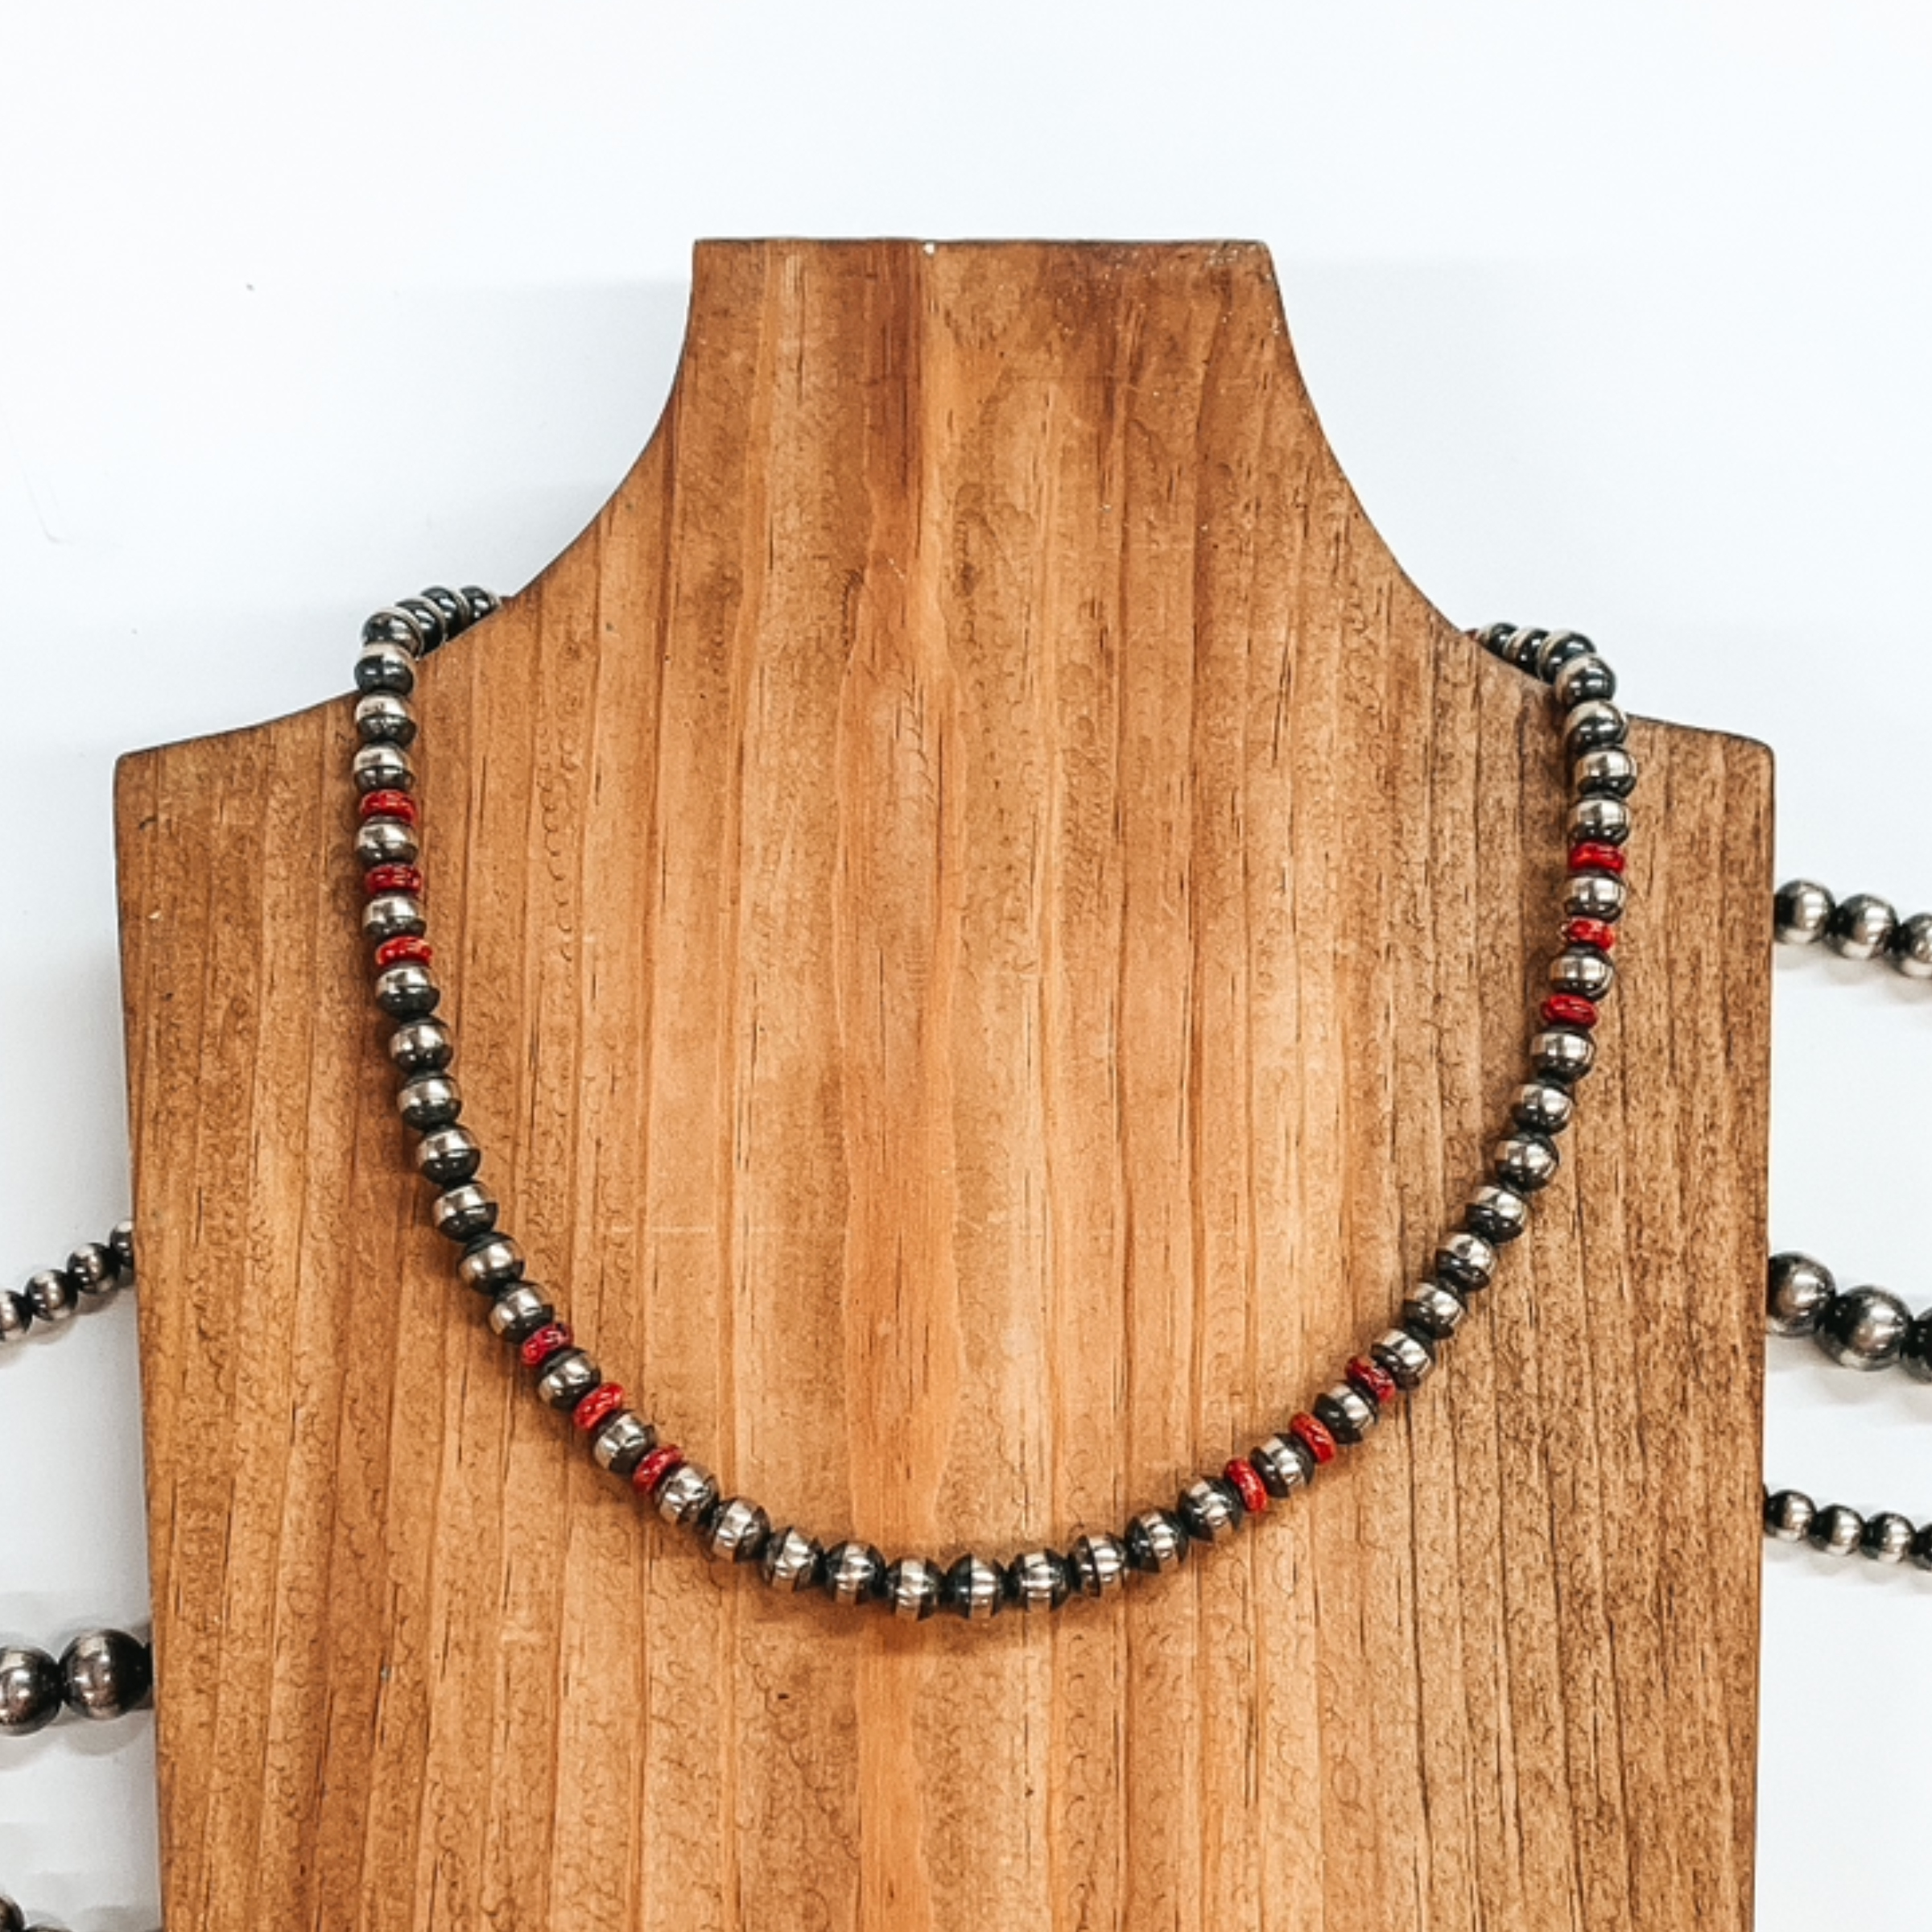 Silver beaded neckace with red bead spacers. This necklace is pictured laying on a wood necklace holder on a white background.